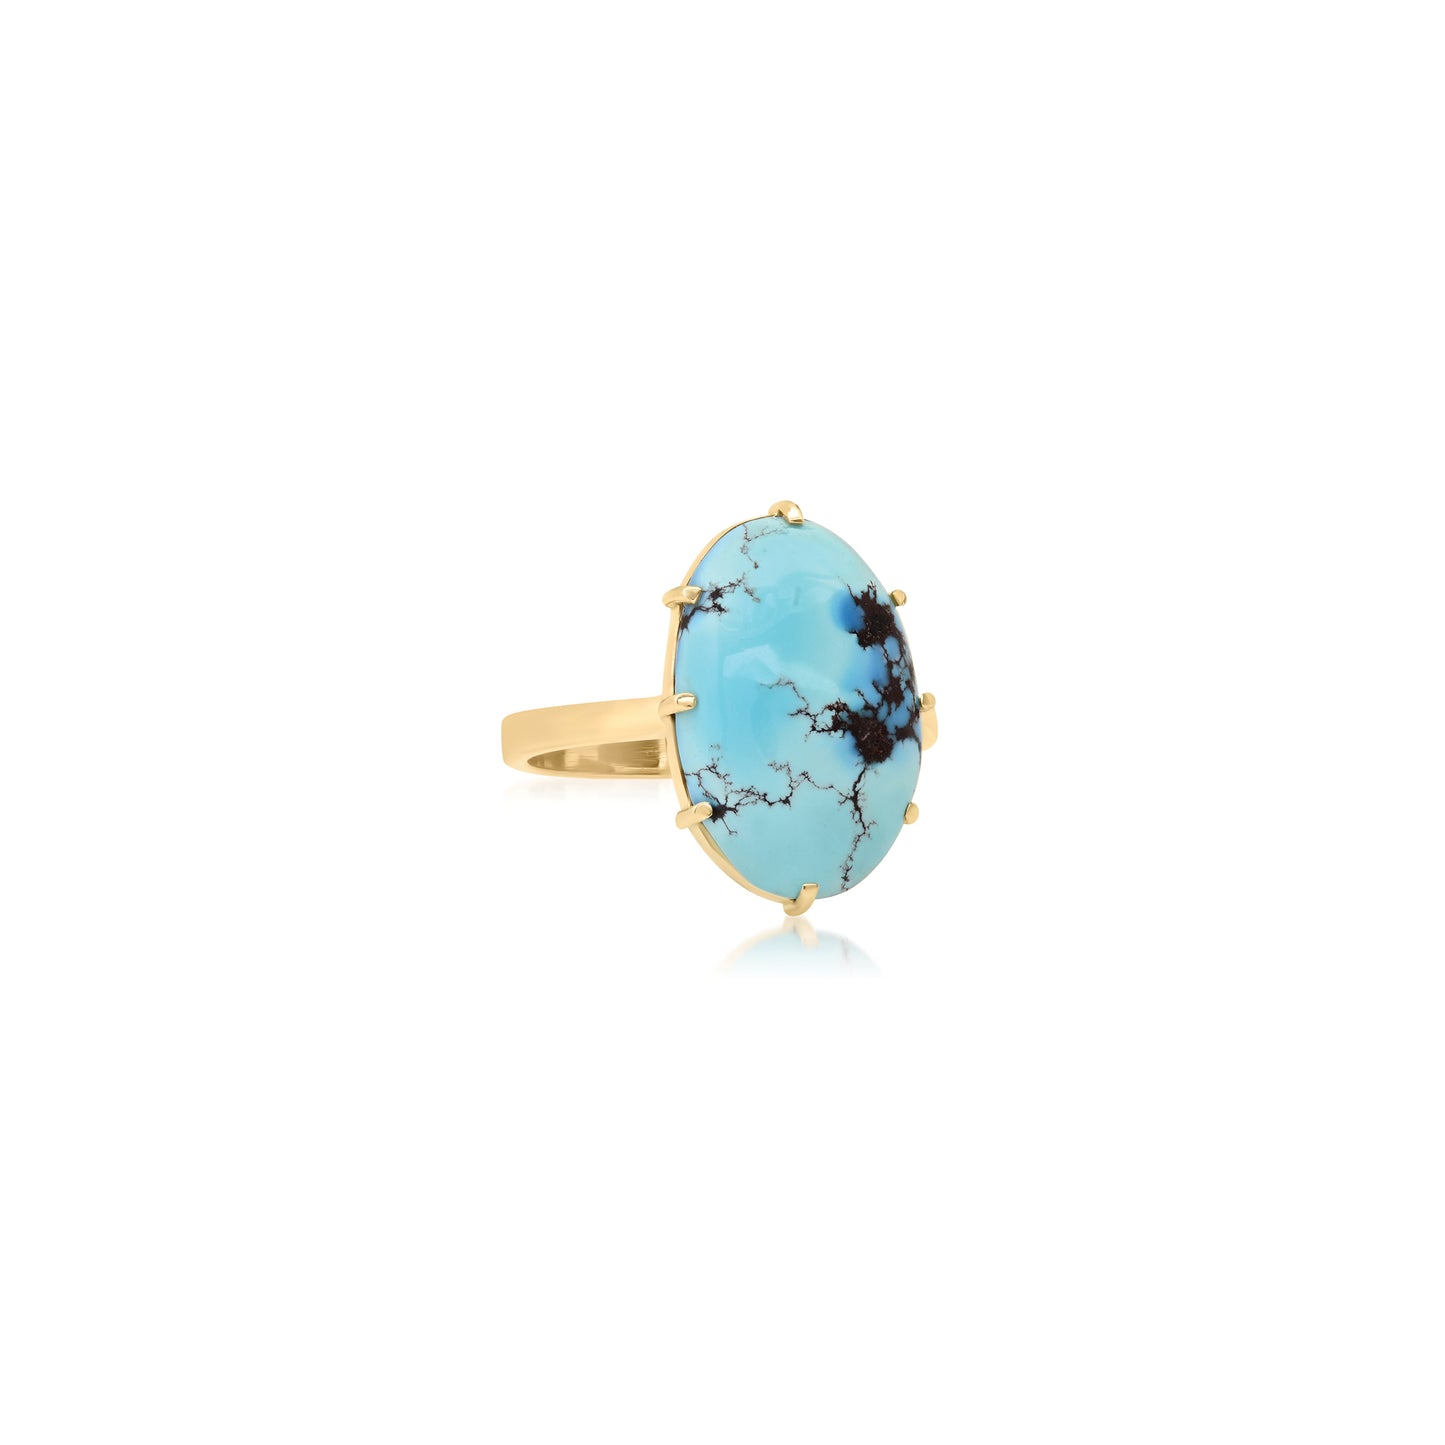 One of a Kind Oval Lavender Turquoise Ring